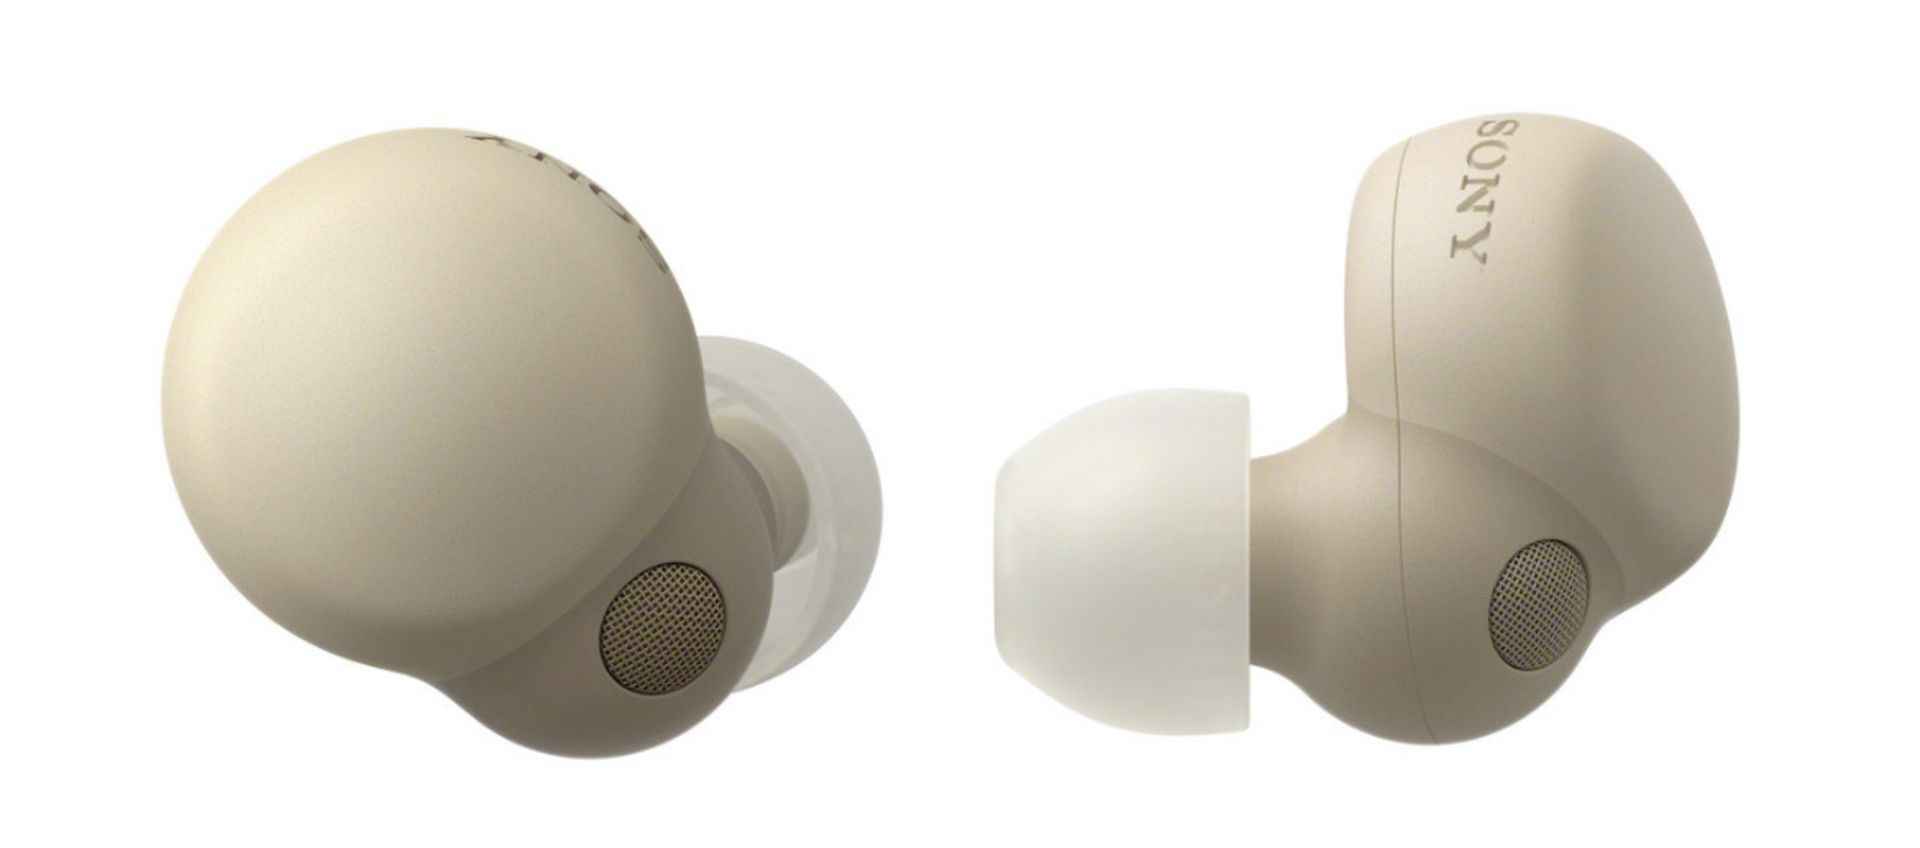 A1 PRODUCT NEW - SONY LINKBUDS S WIRELESS NOISE-CANCELLING, WATER RESISTANT HEADPHONES IN BEIGE - - Bild 4 aus 6